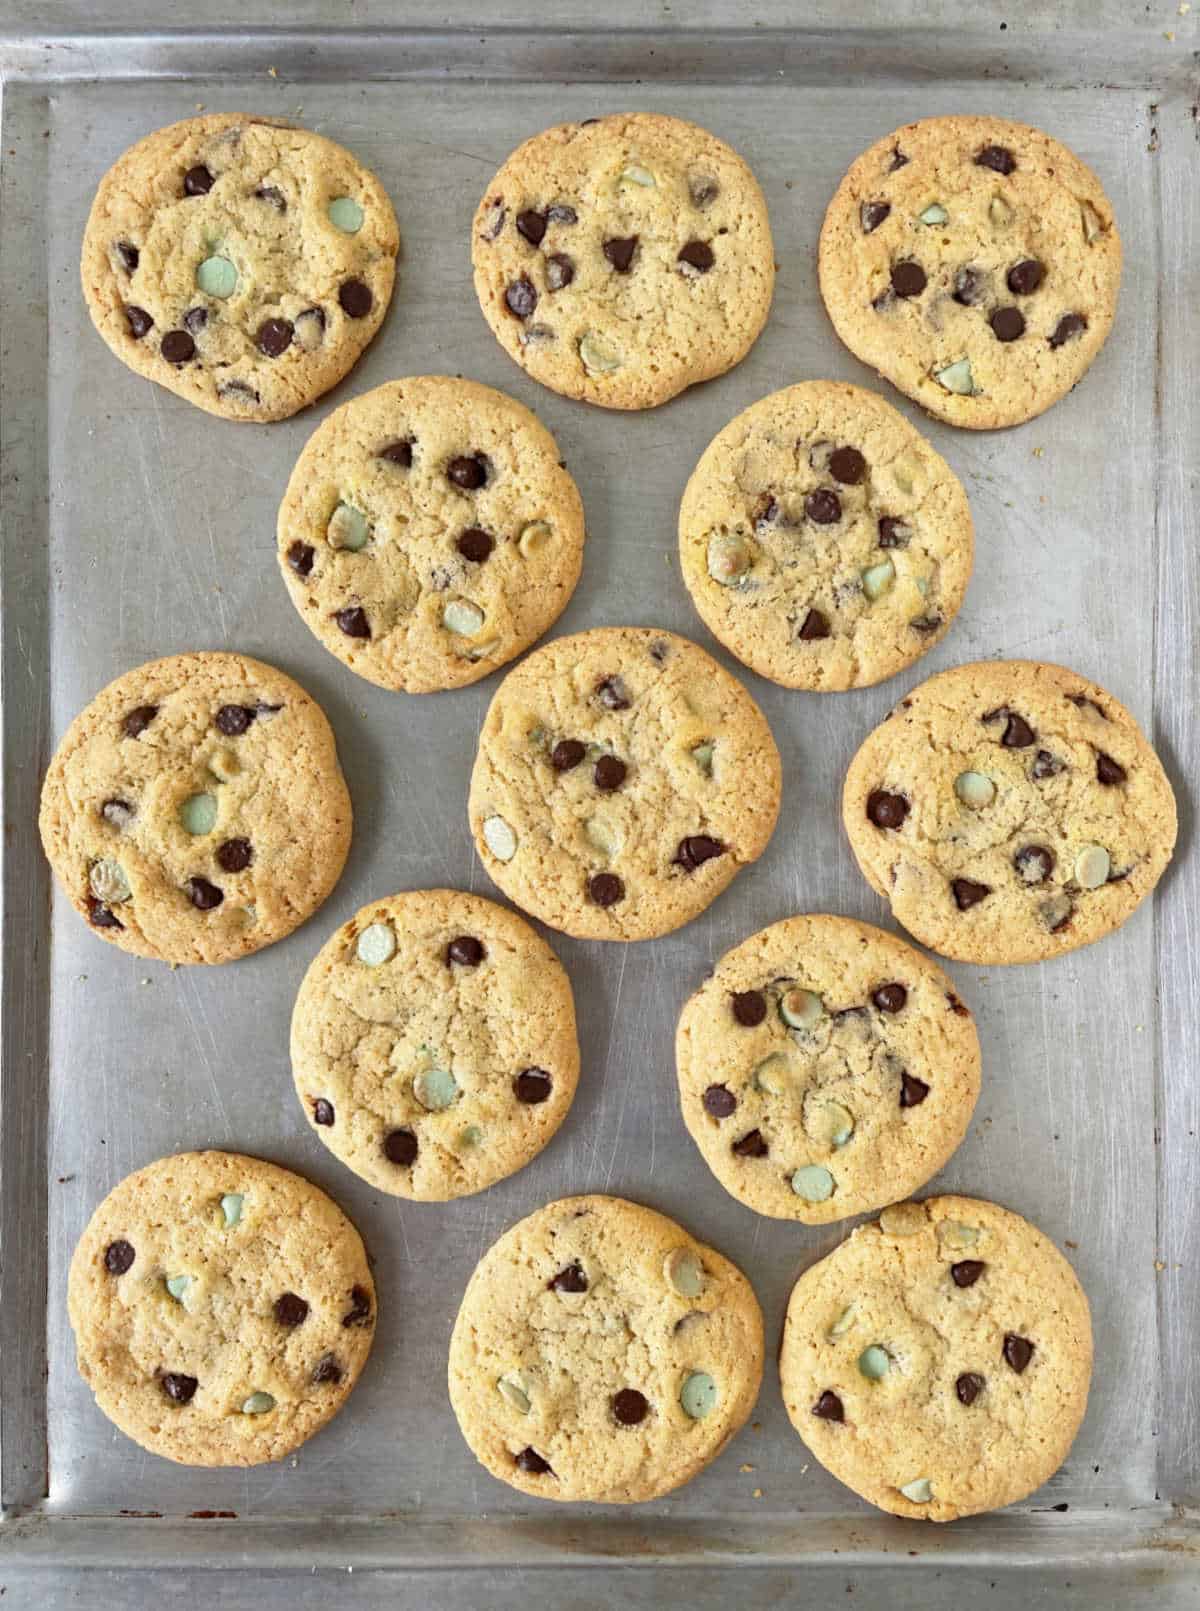 Baked mint chocolate chip cookies on metal cookie sheet, top view